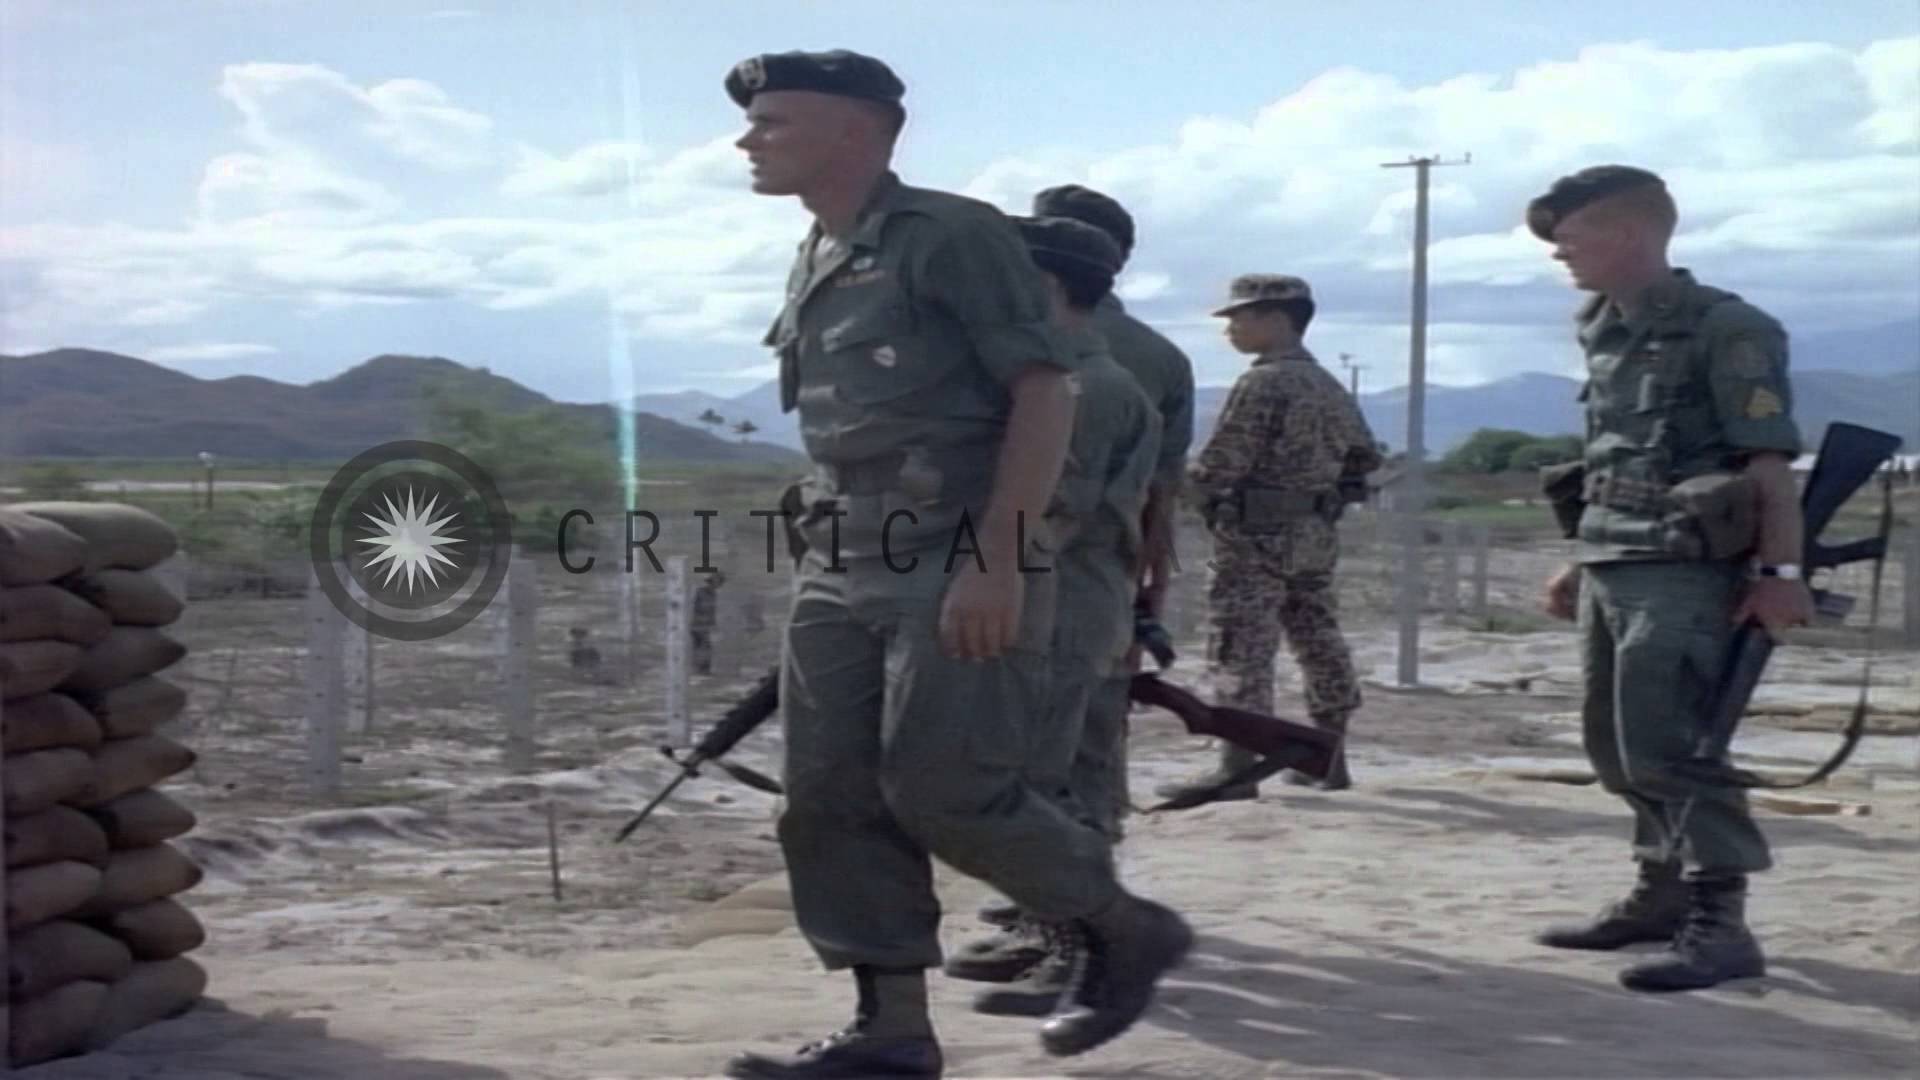 US Army Special Forces officers and Vietnamese officers discuss near